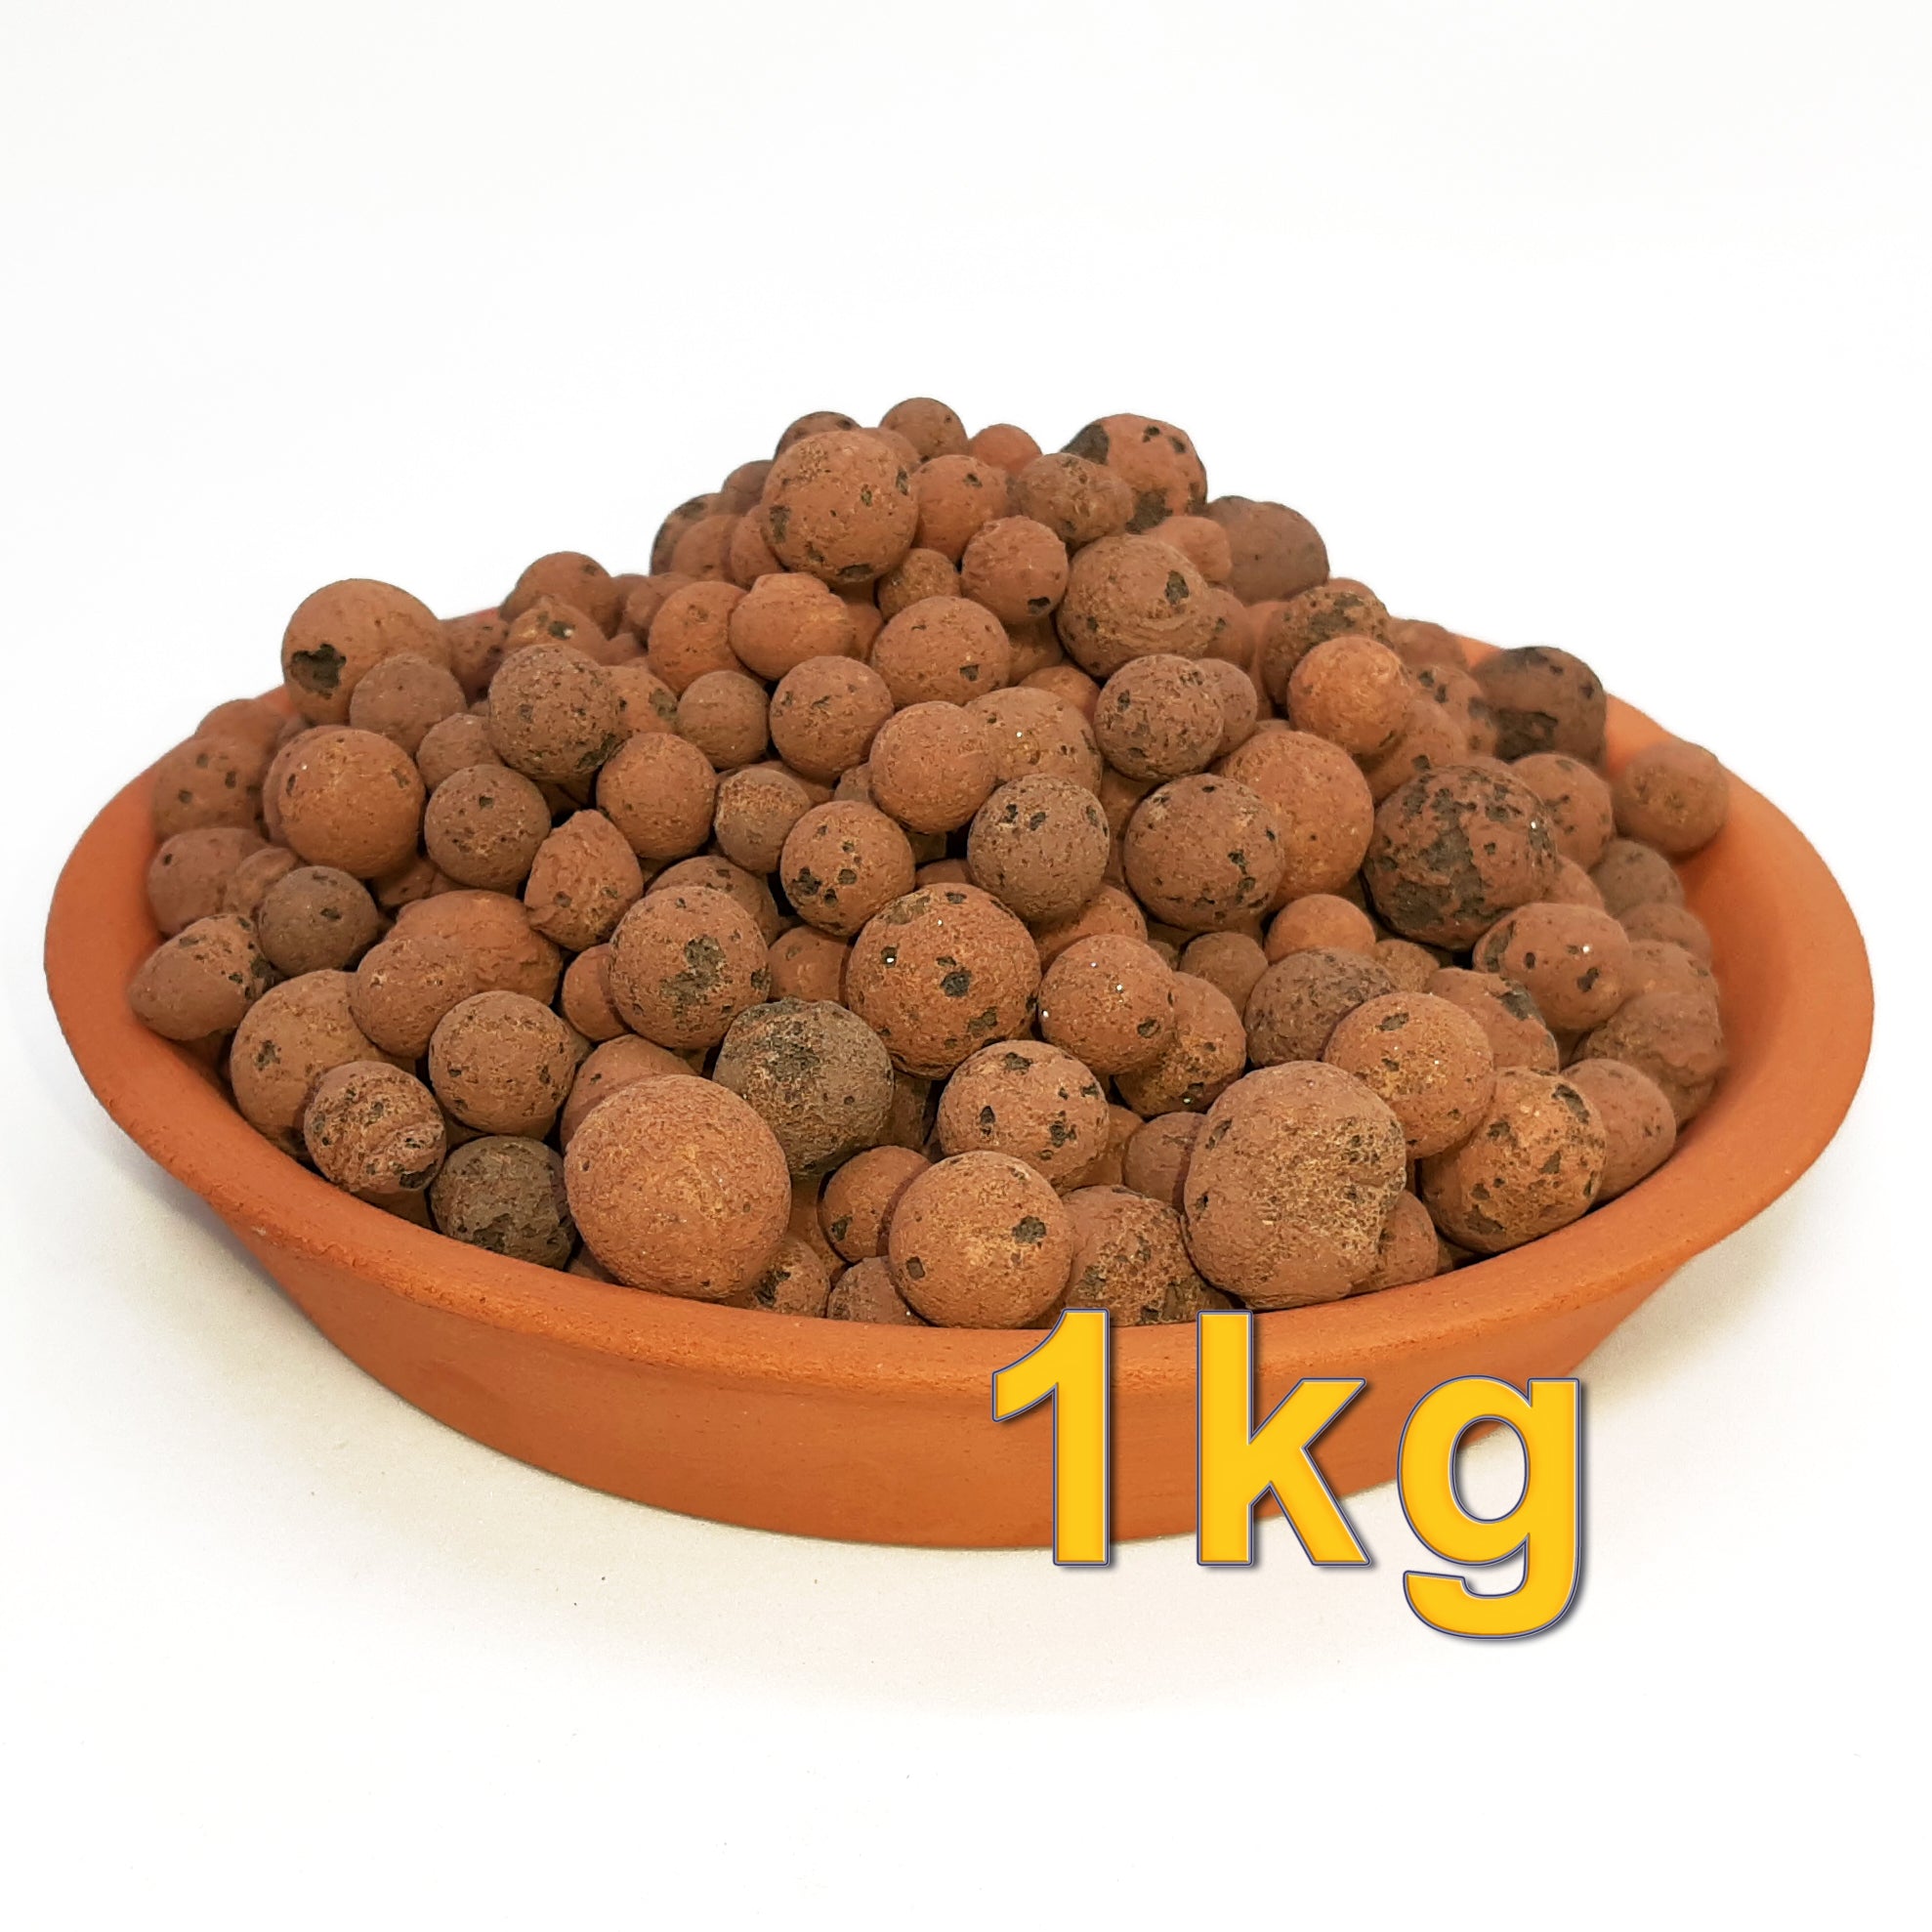 Hidroton Expanded Clay Substrate for plants 1kg